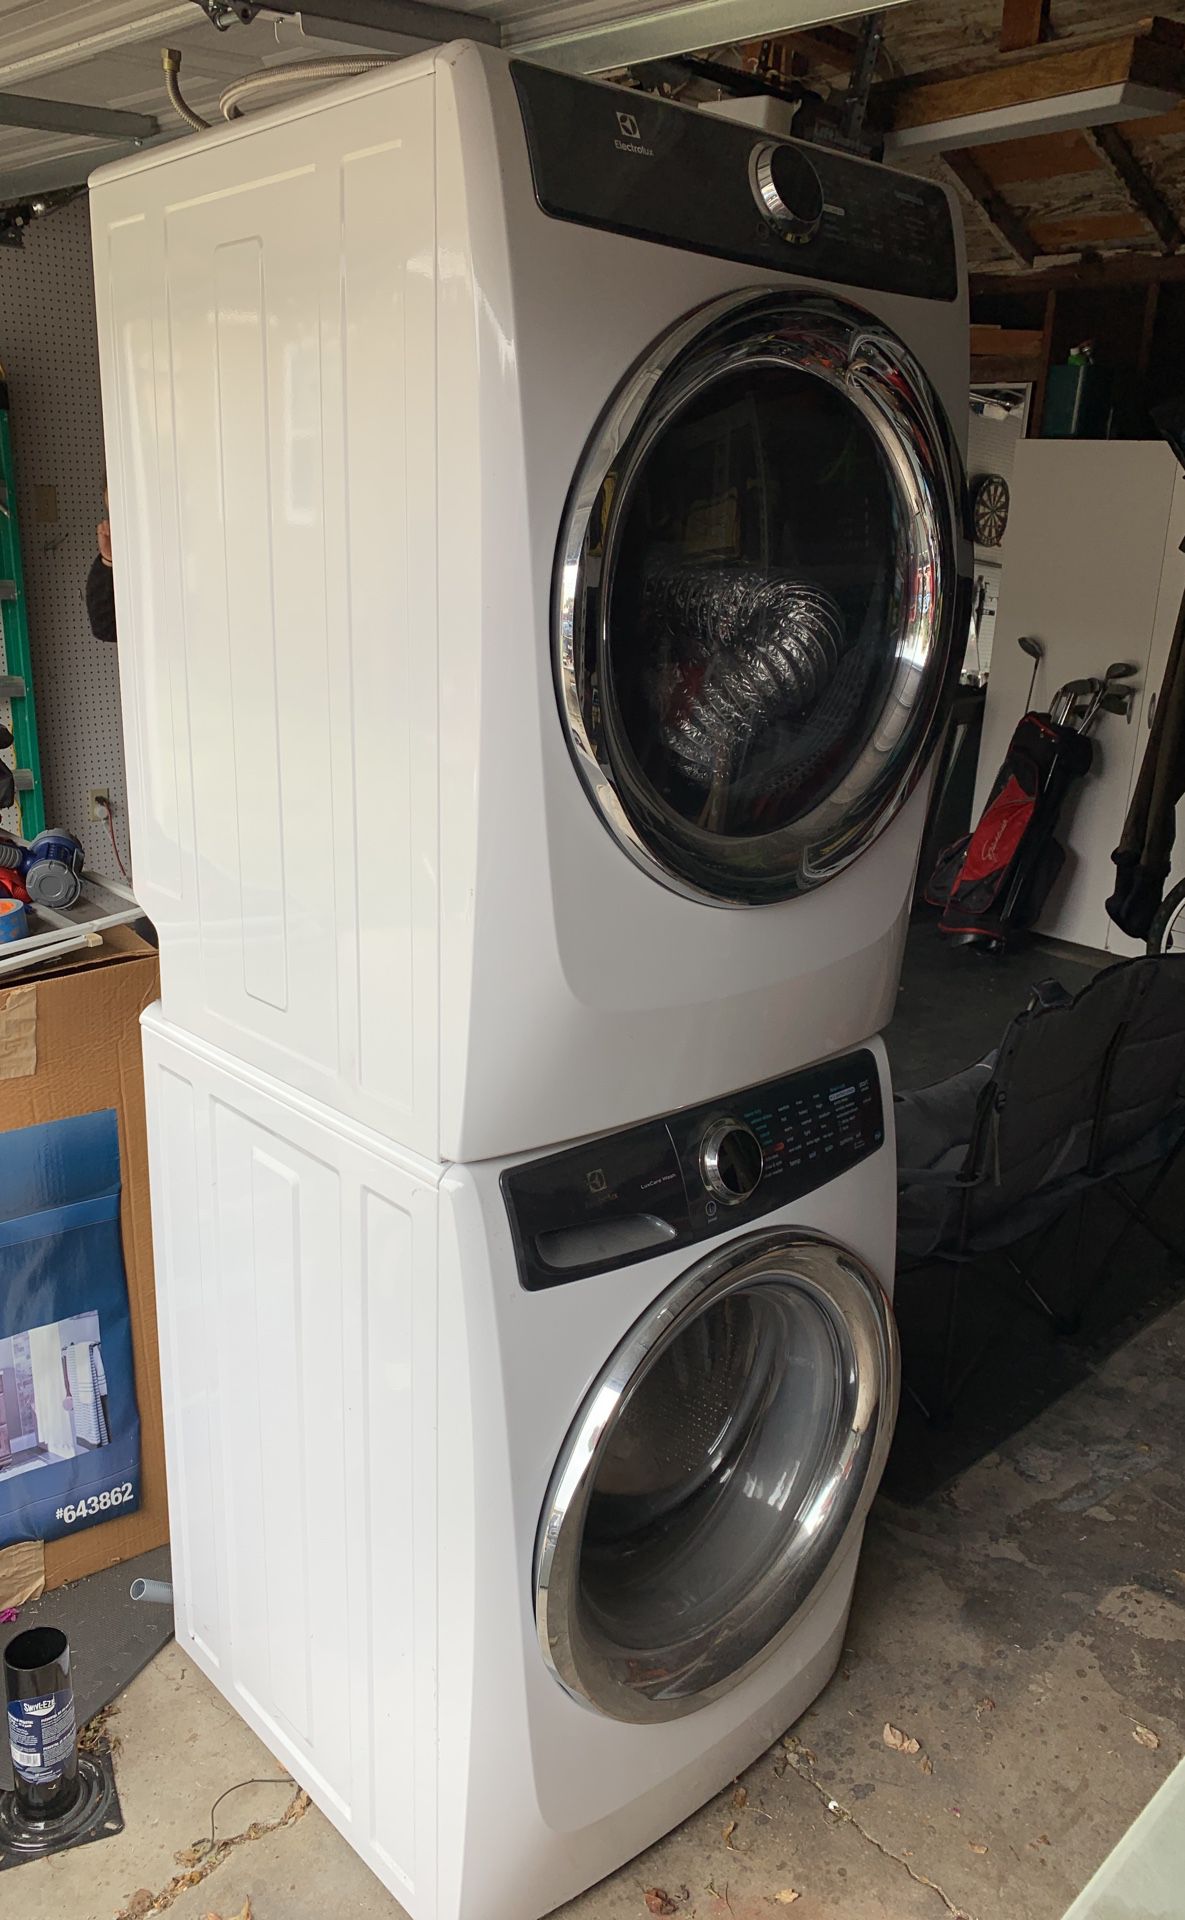 Washer/dryer stacked for sale, Electrolux brand.